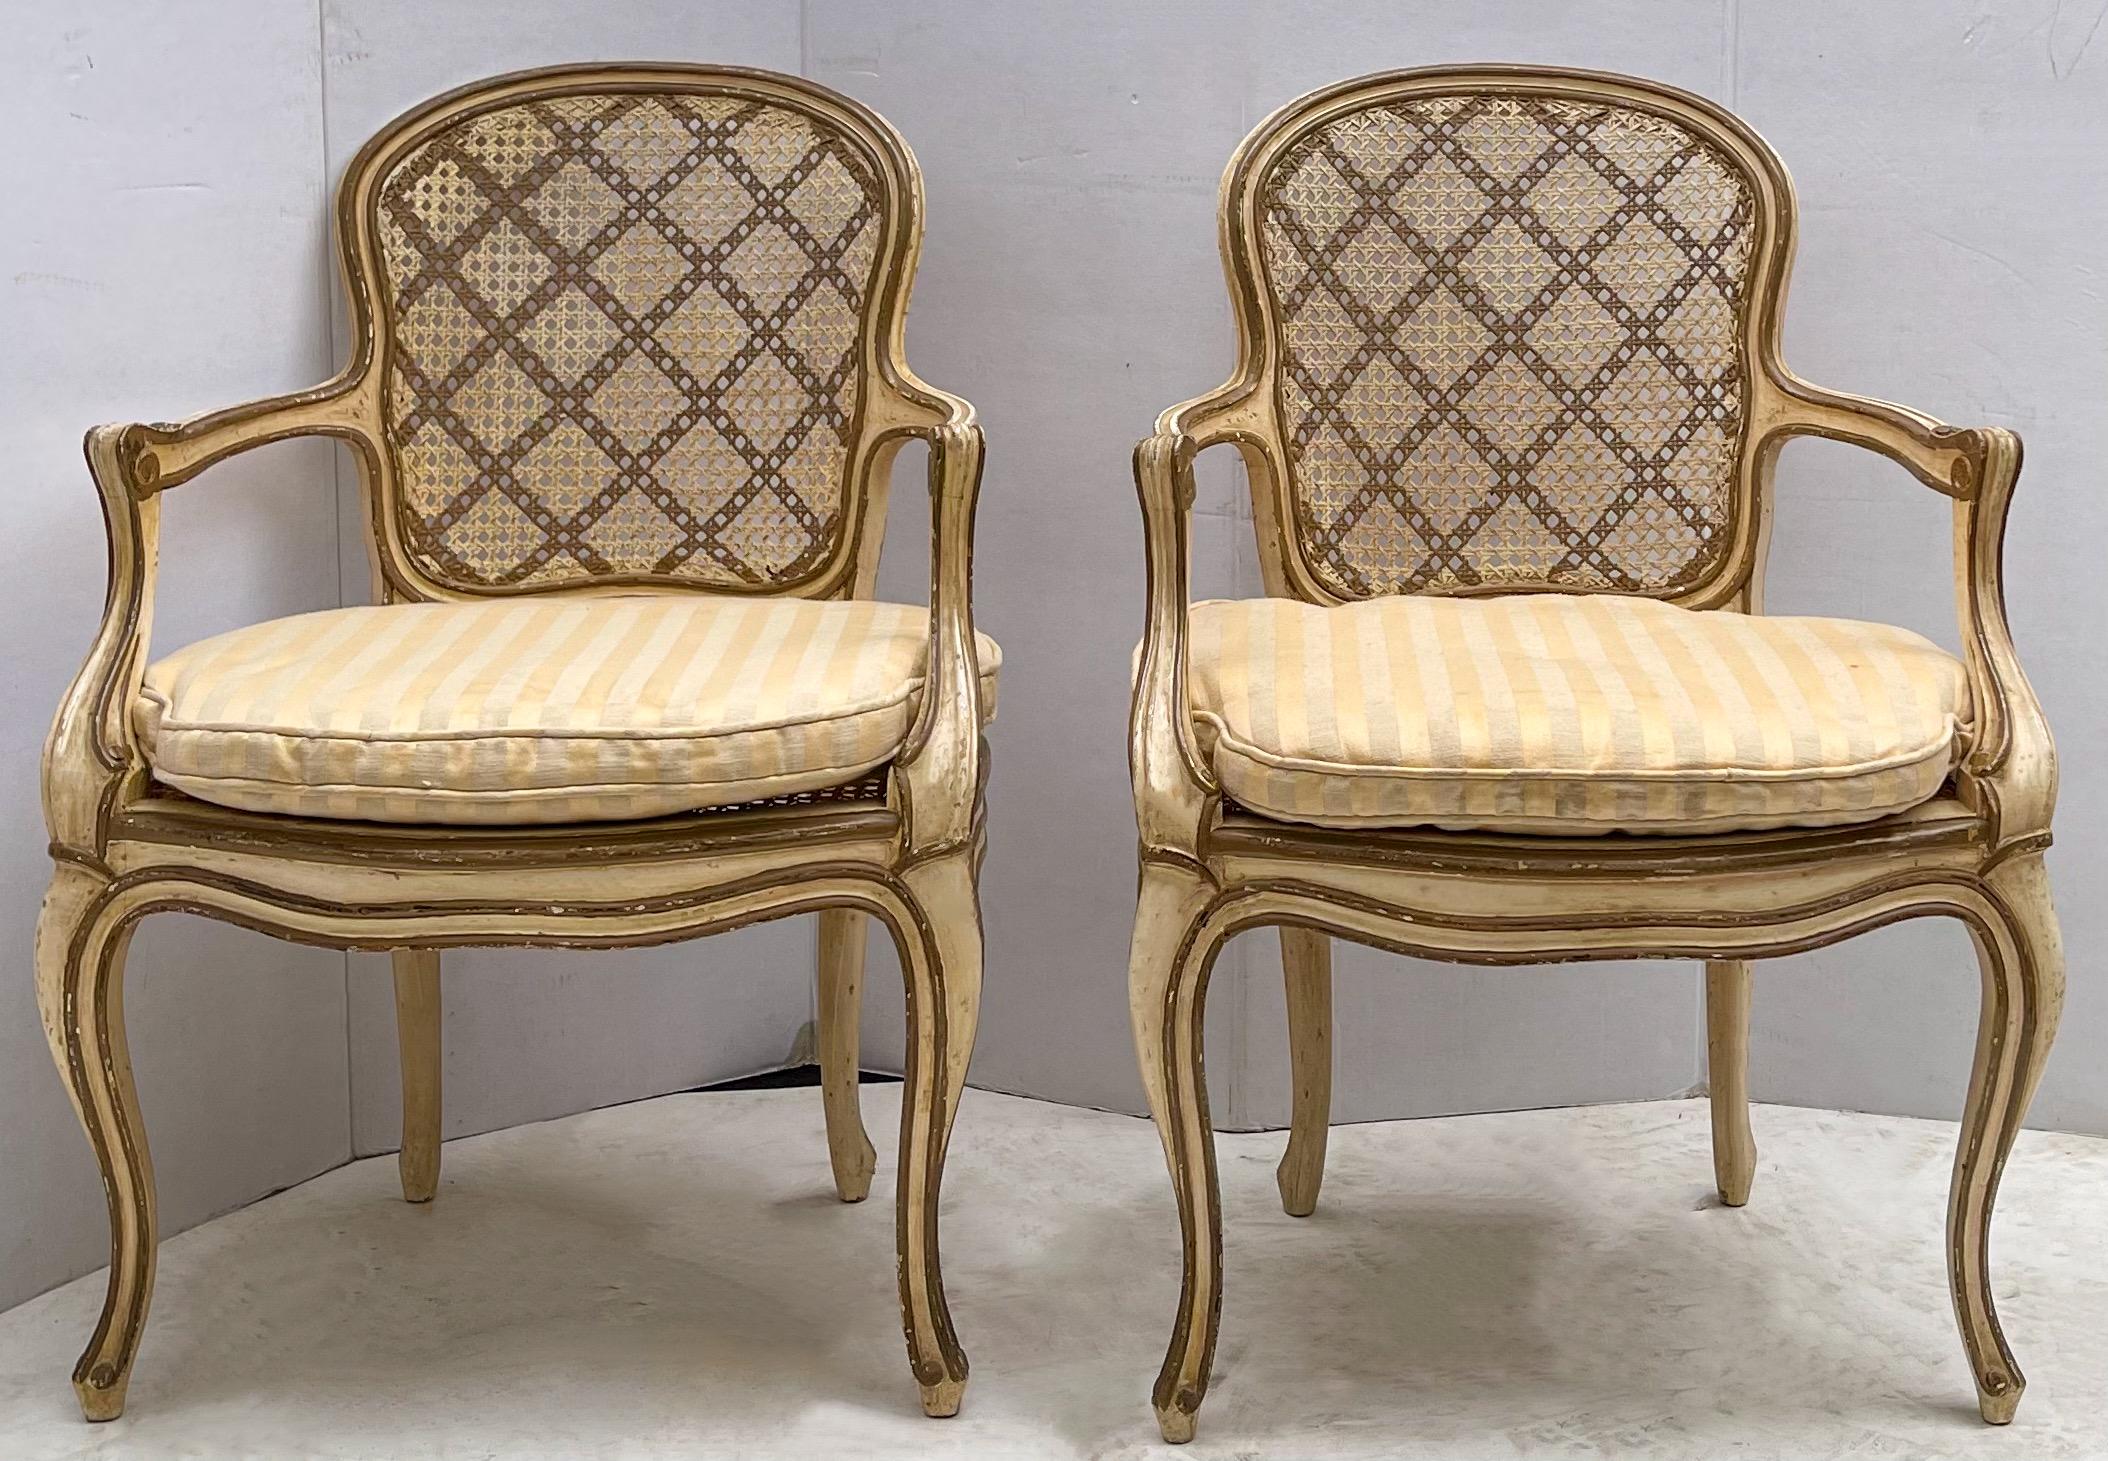 1950s Gilt and Painted French Bergere Chairs, Pair In Good Condition For Sale In Kennesaw, GA